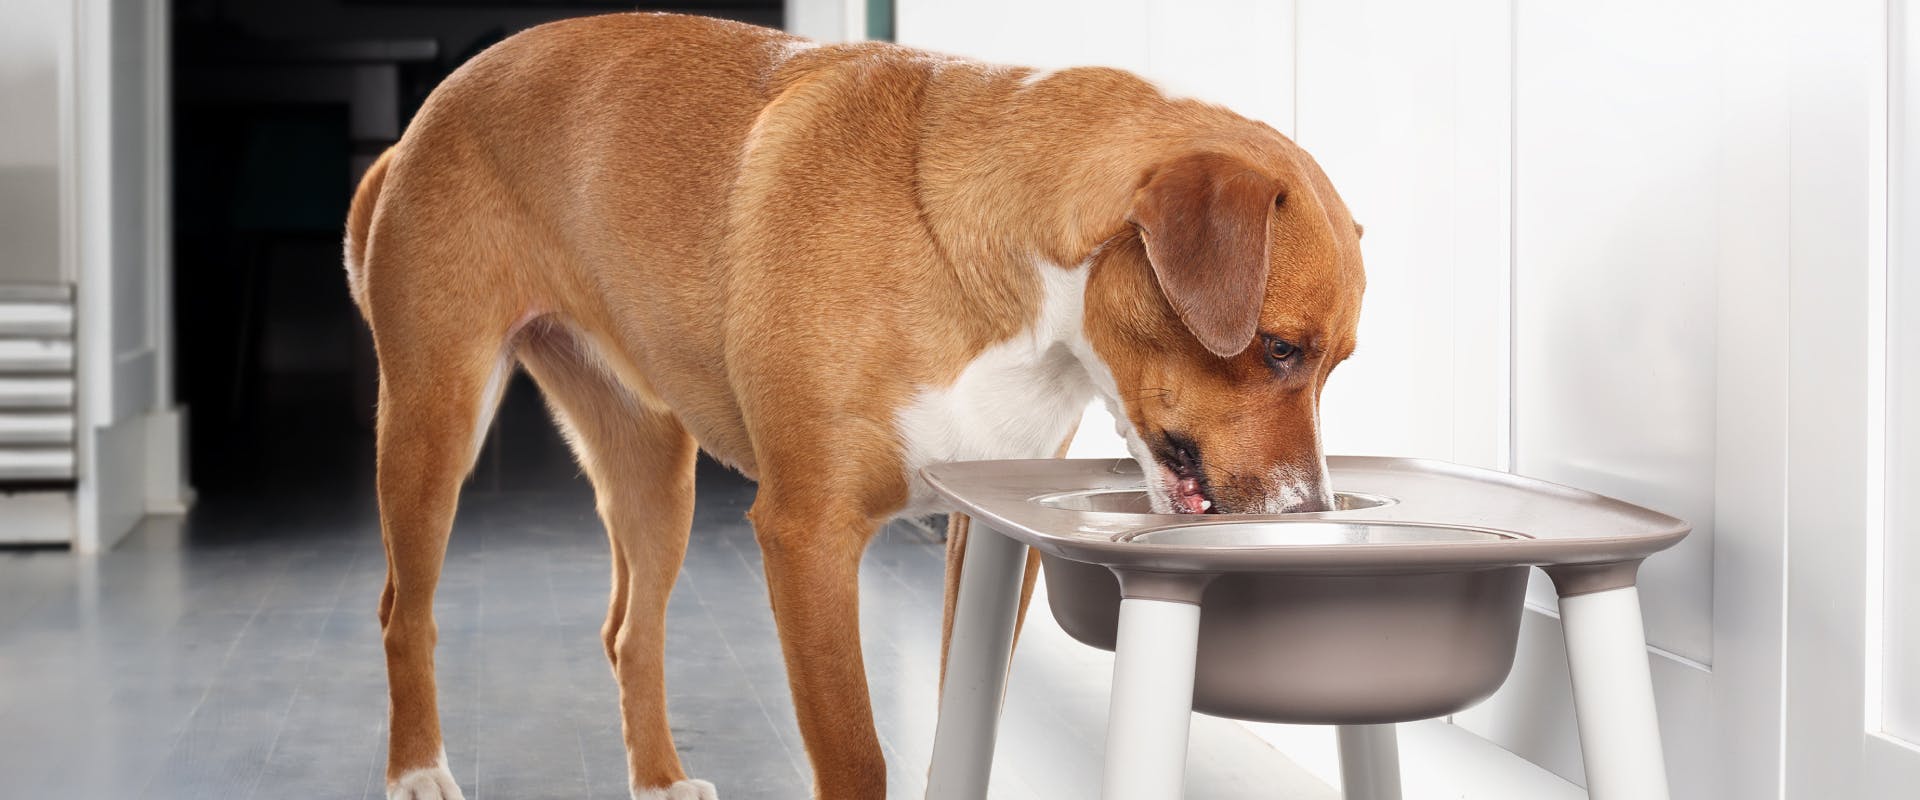 a large brown a white dog eating out of an elevated food bowl